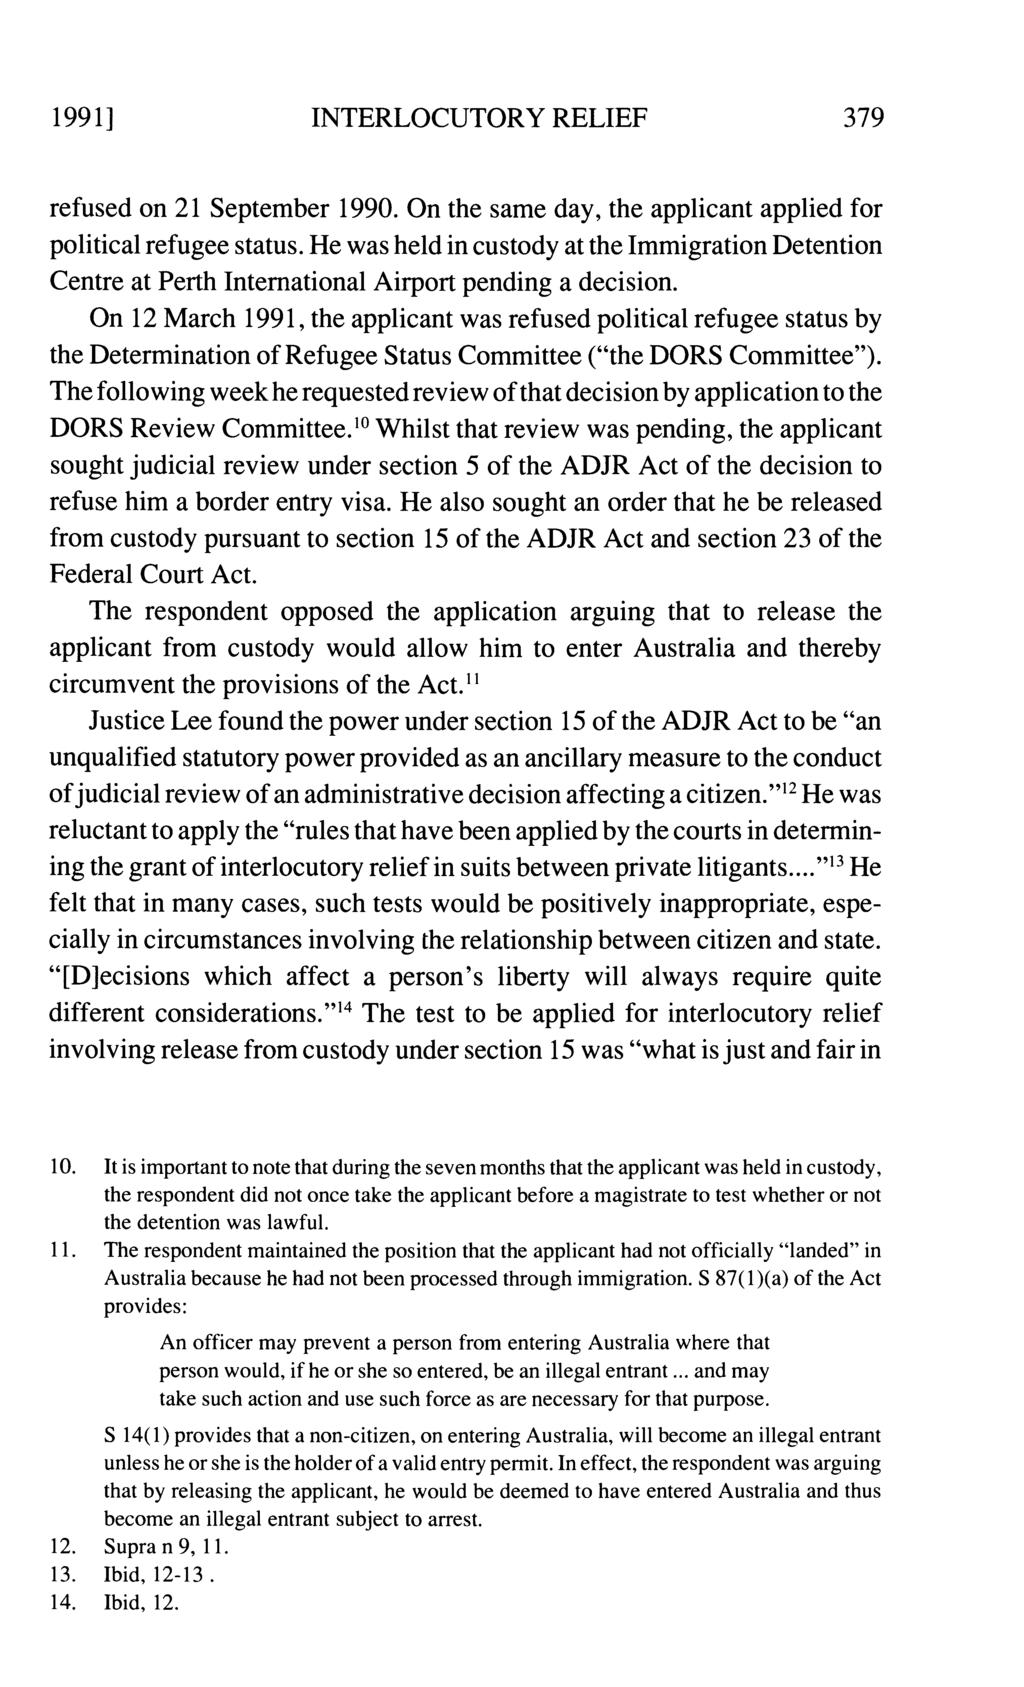 INTERLOCUTORY RELIEF refused on 21 September 1990. On the same day, the applicant applied for political refugee status.